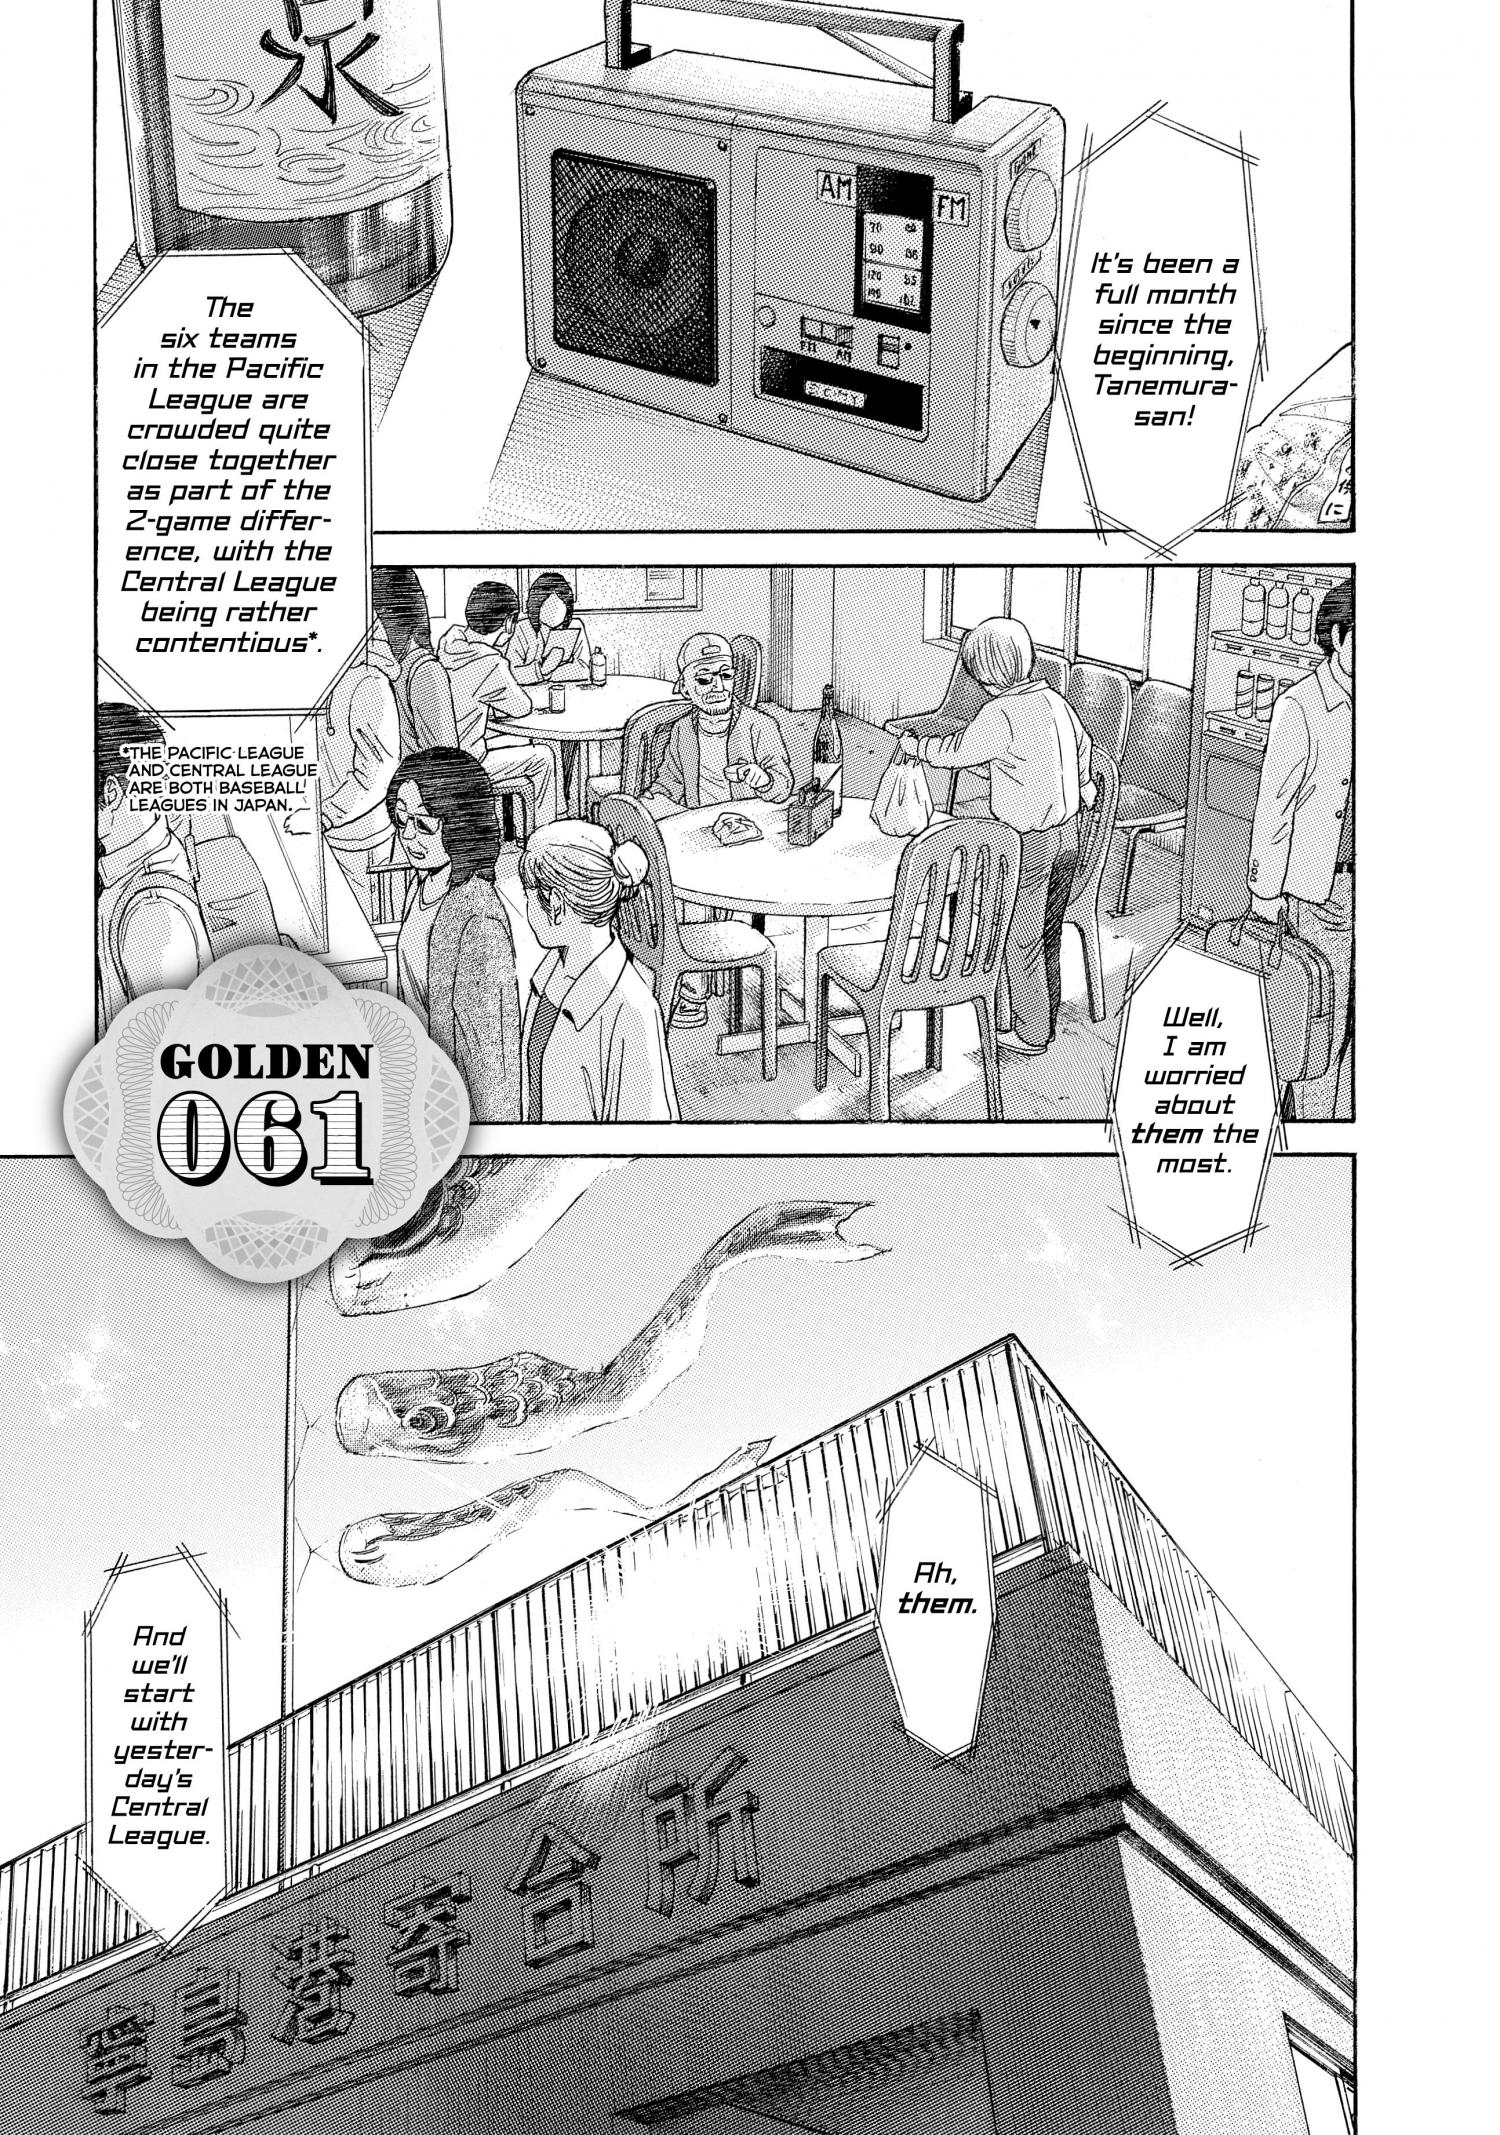 Golden Gold - Page 2